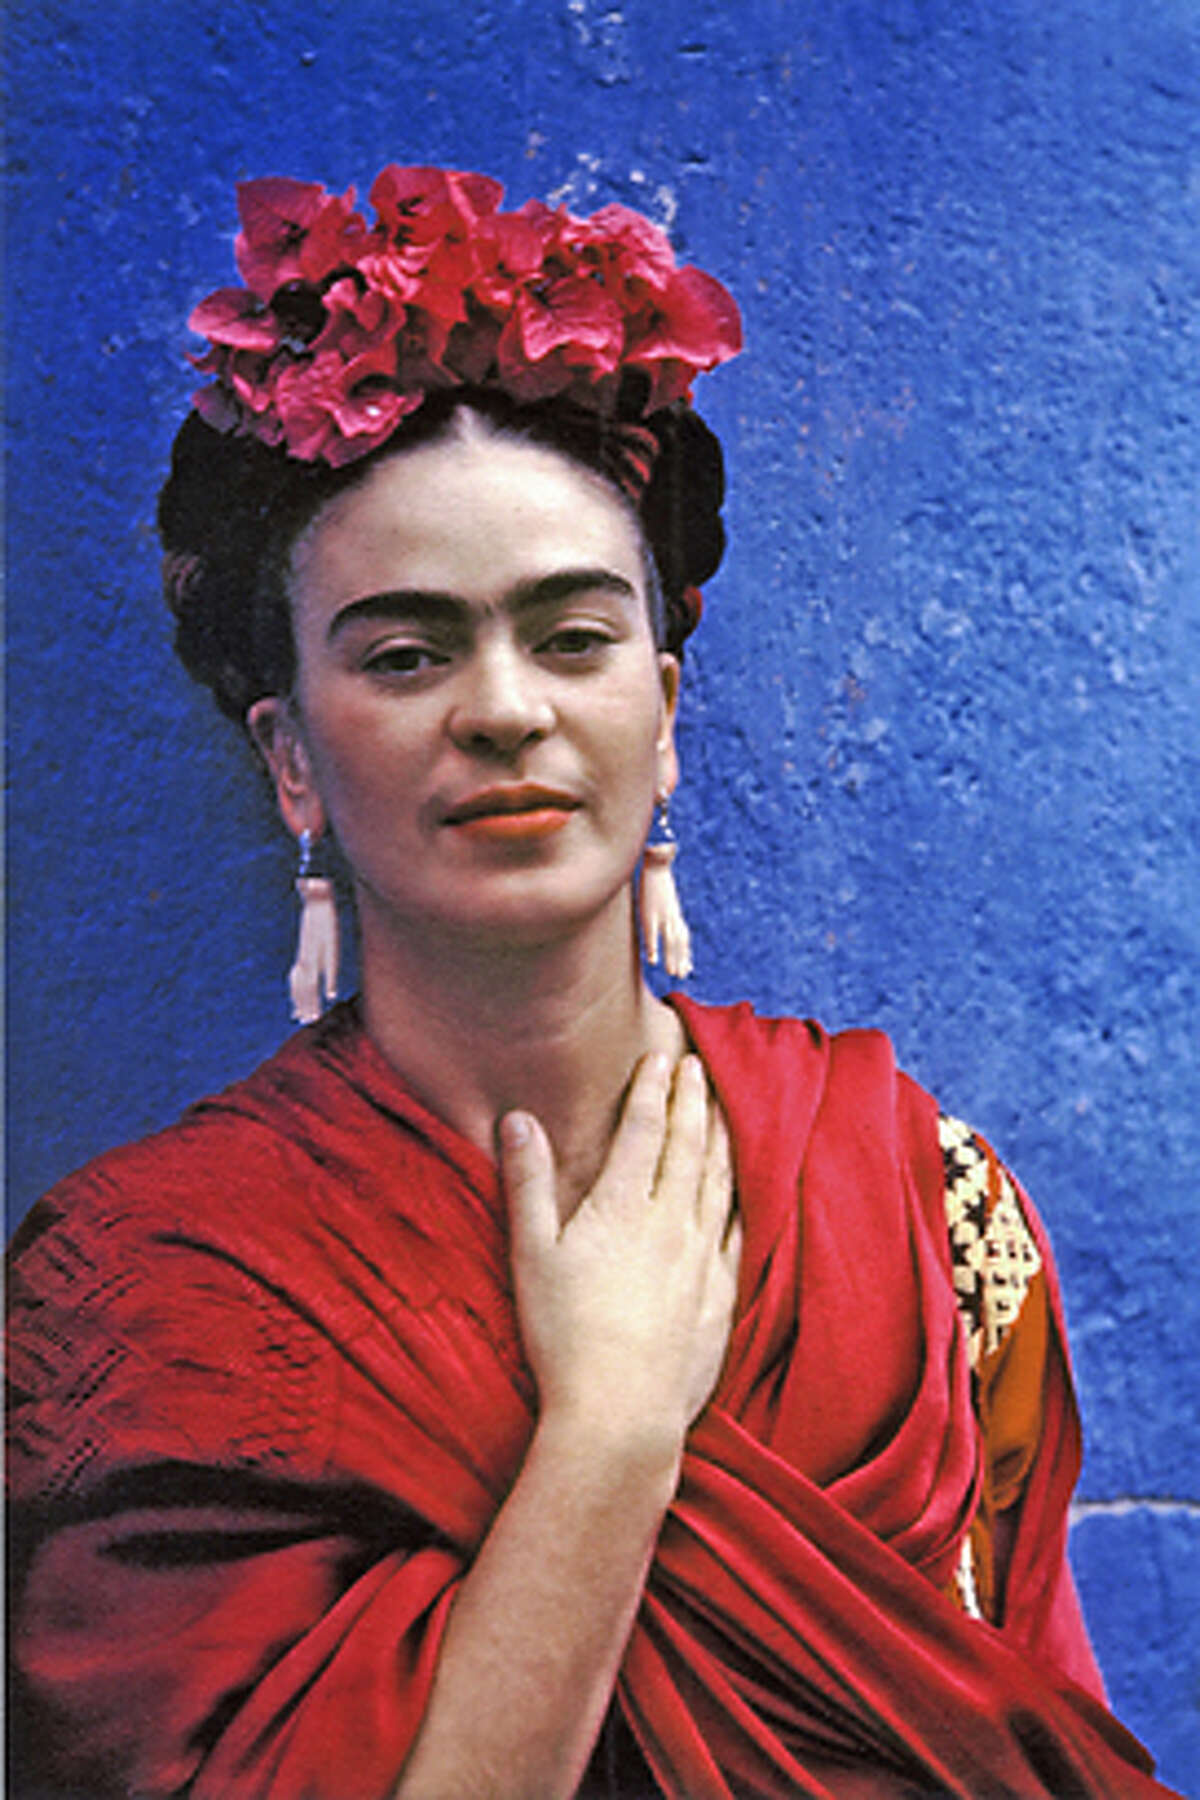 Documentary on Kahlo adds little of value